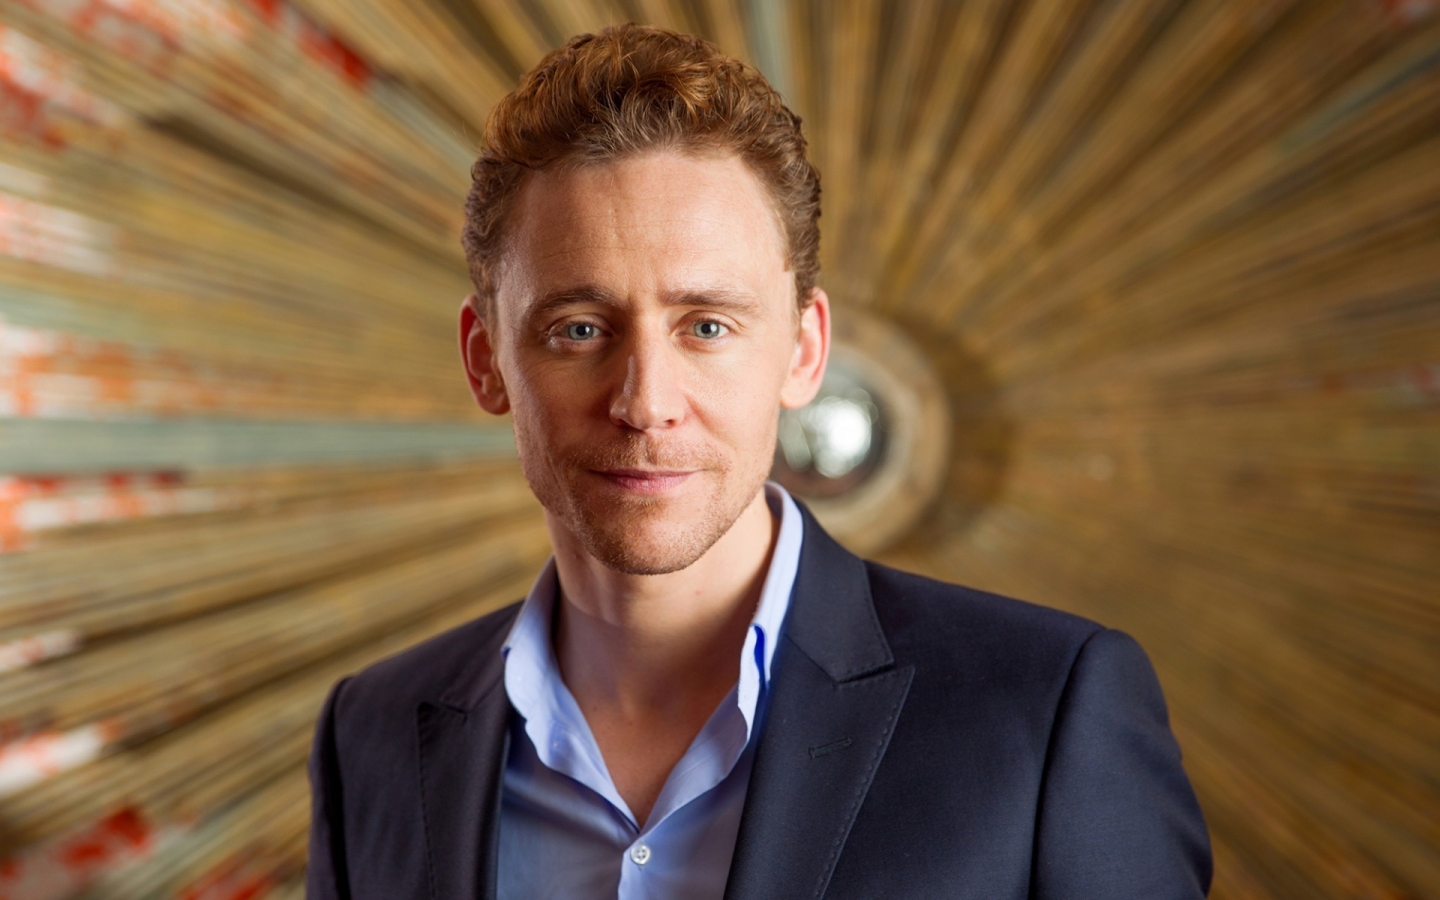 Tom Hiddleston Look for 1440 x 900 widescreen resolution